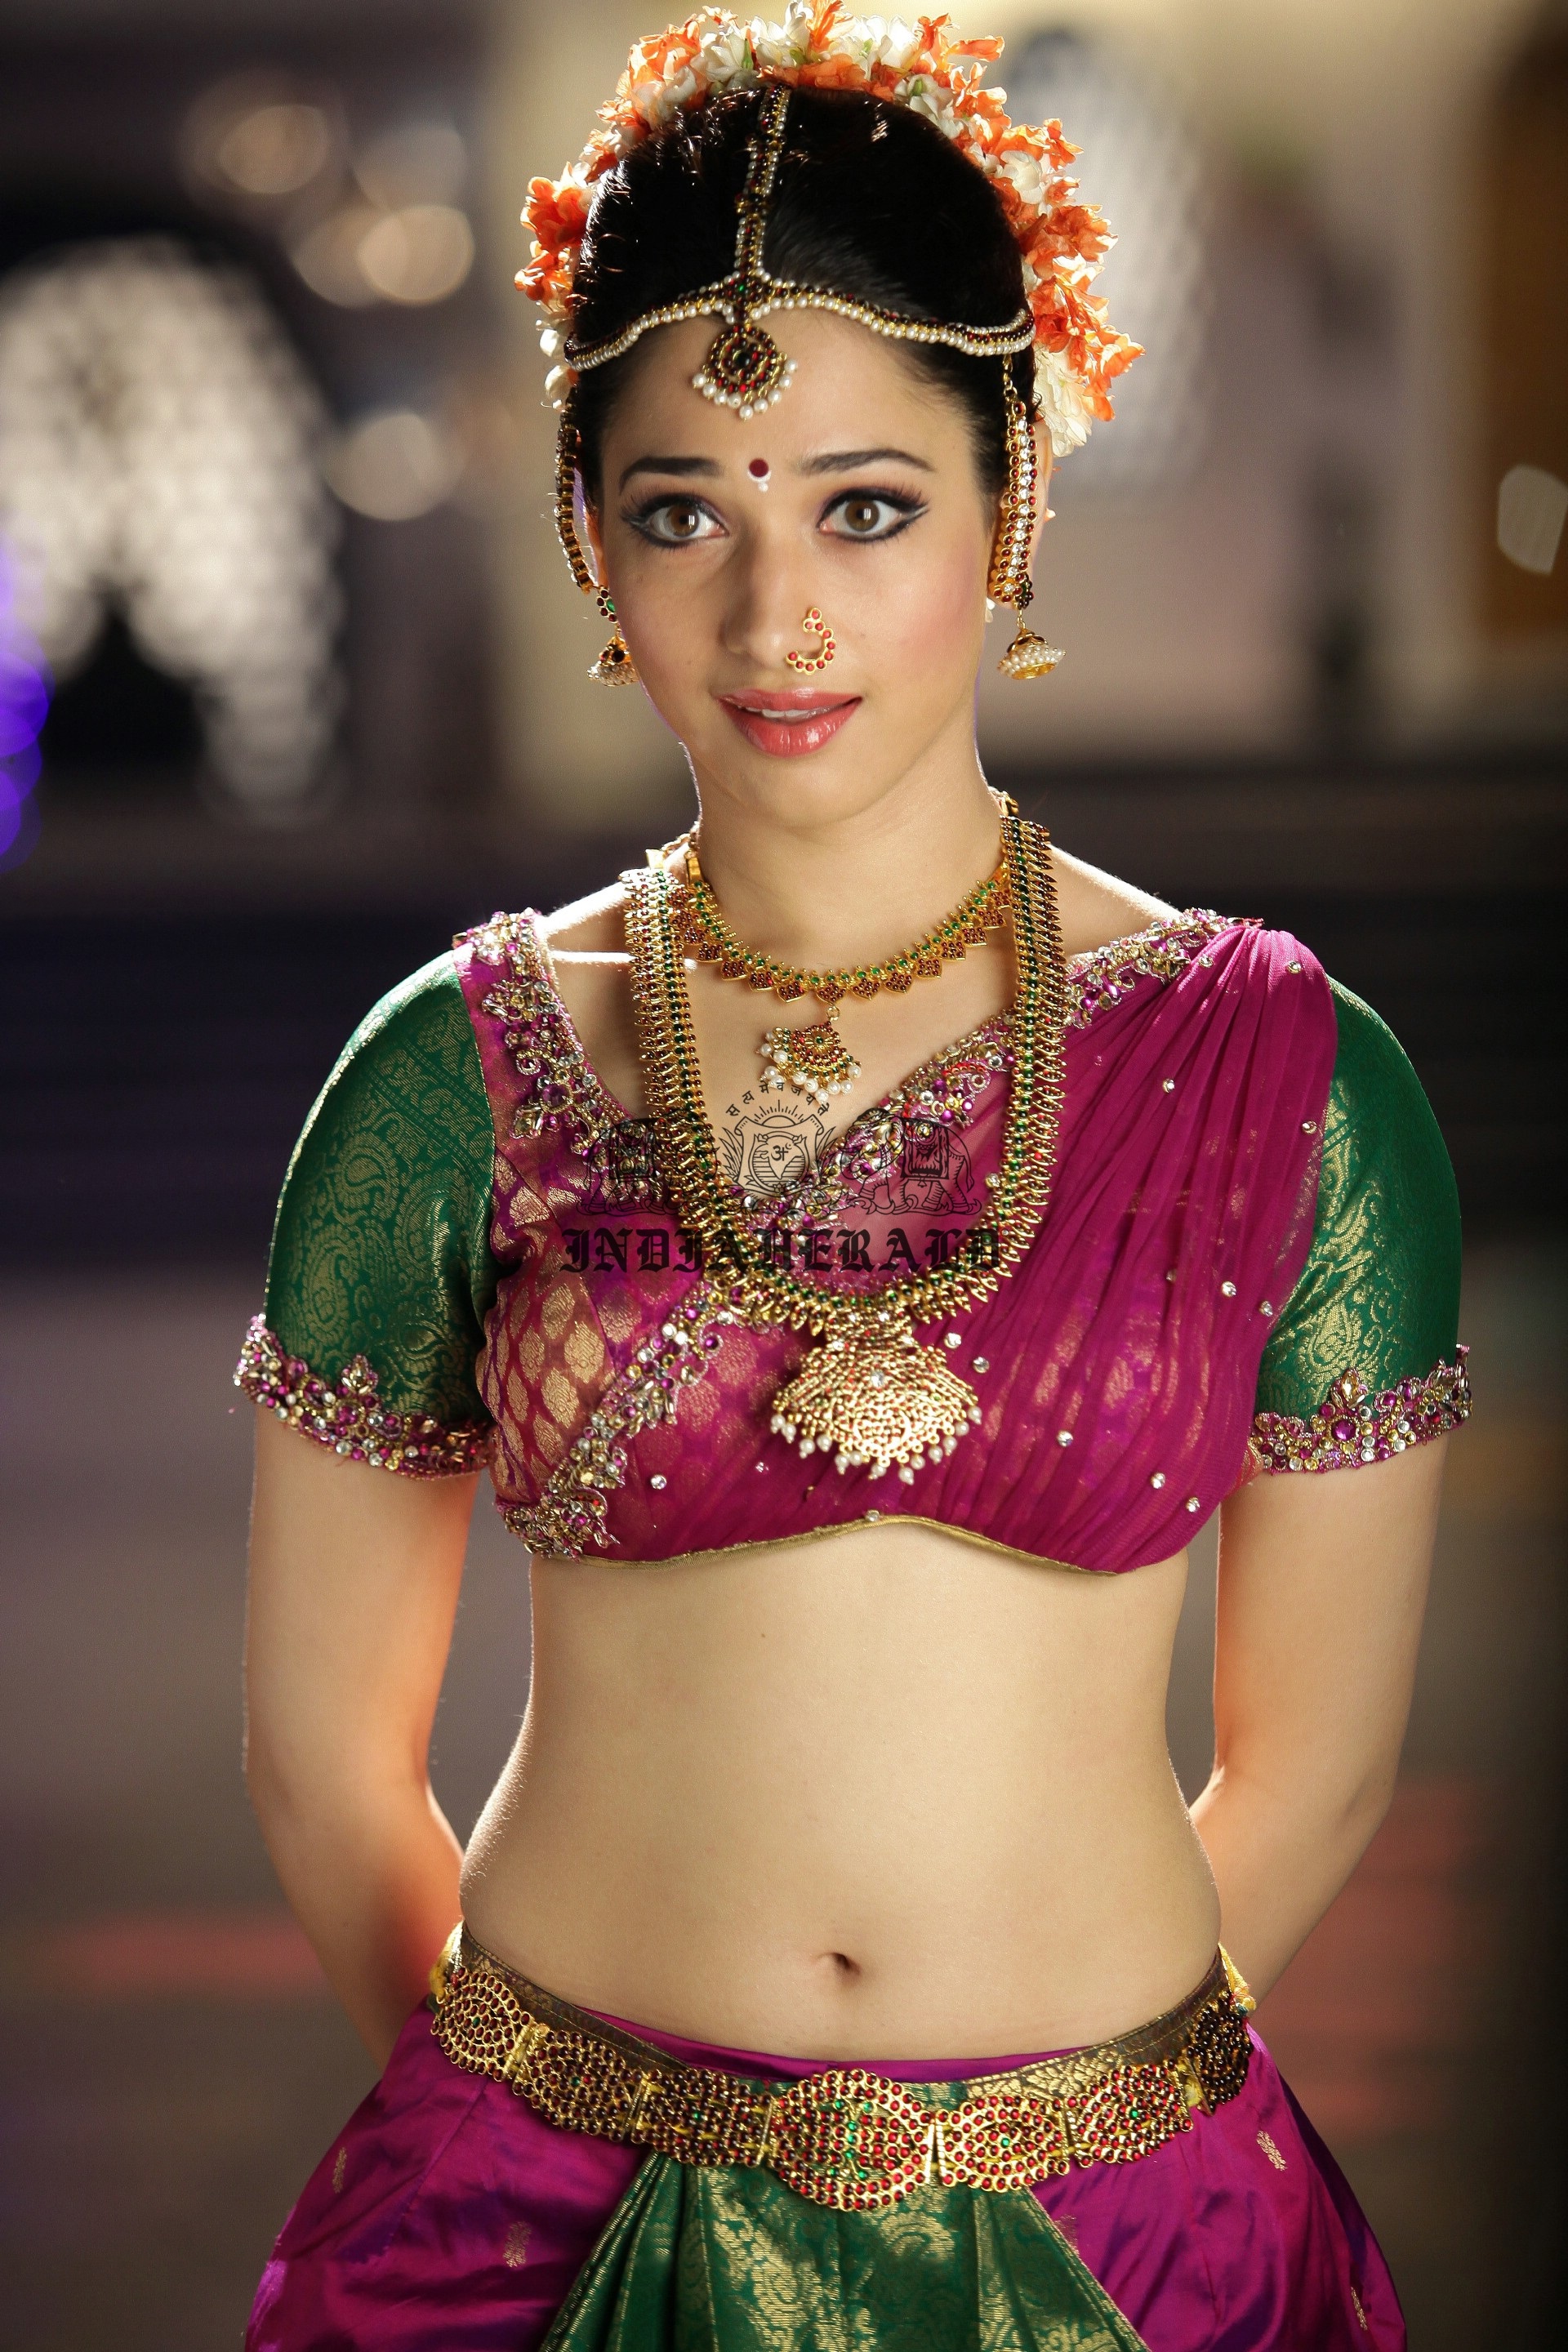 Hottest High Clarity Photos of Tamanna in Saree exposing her navel and midriff Set 1